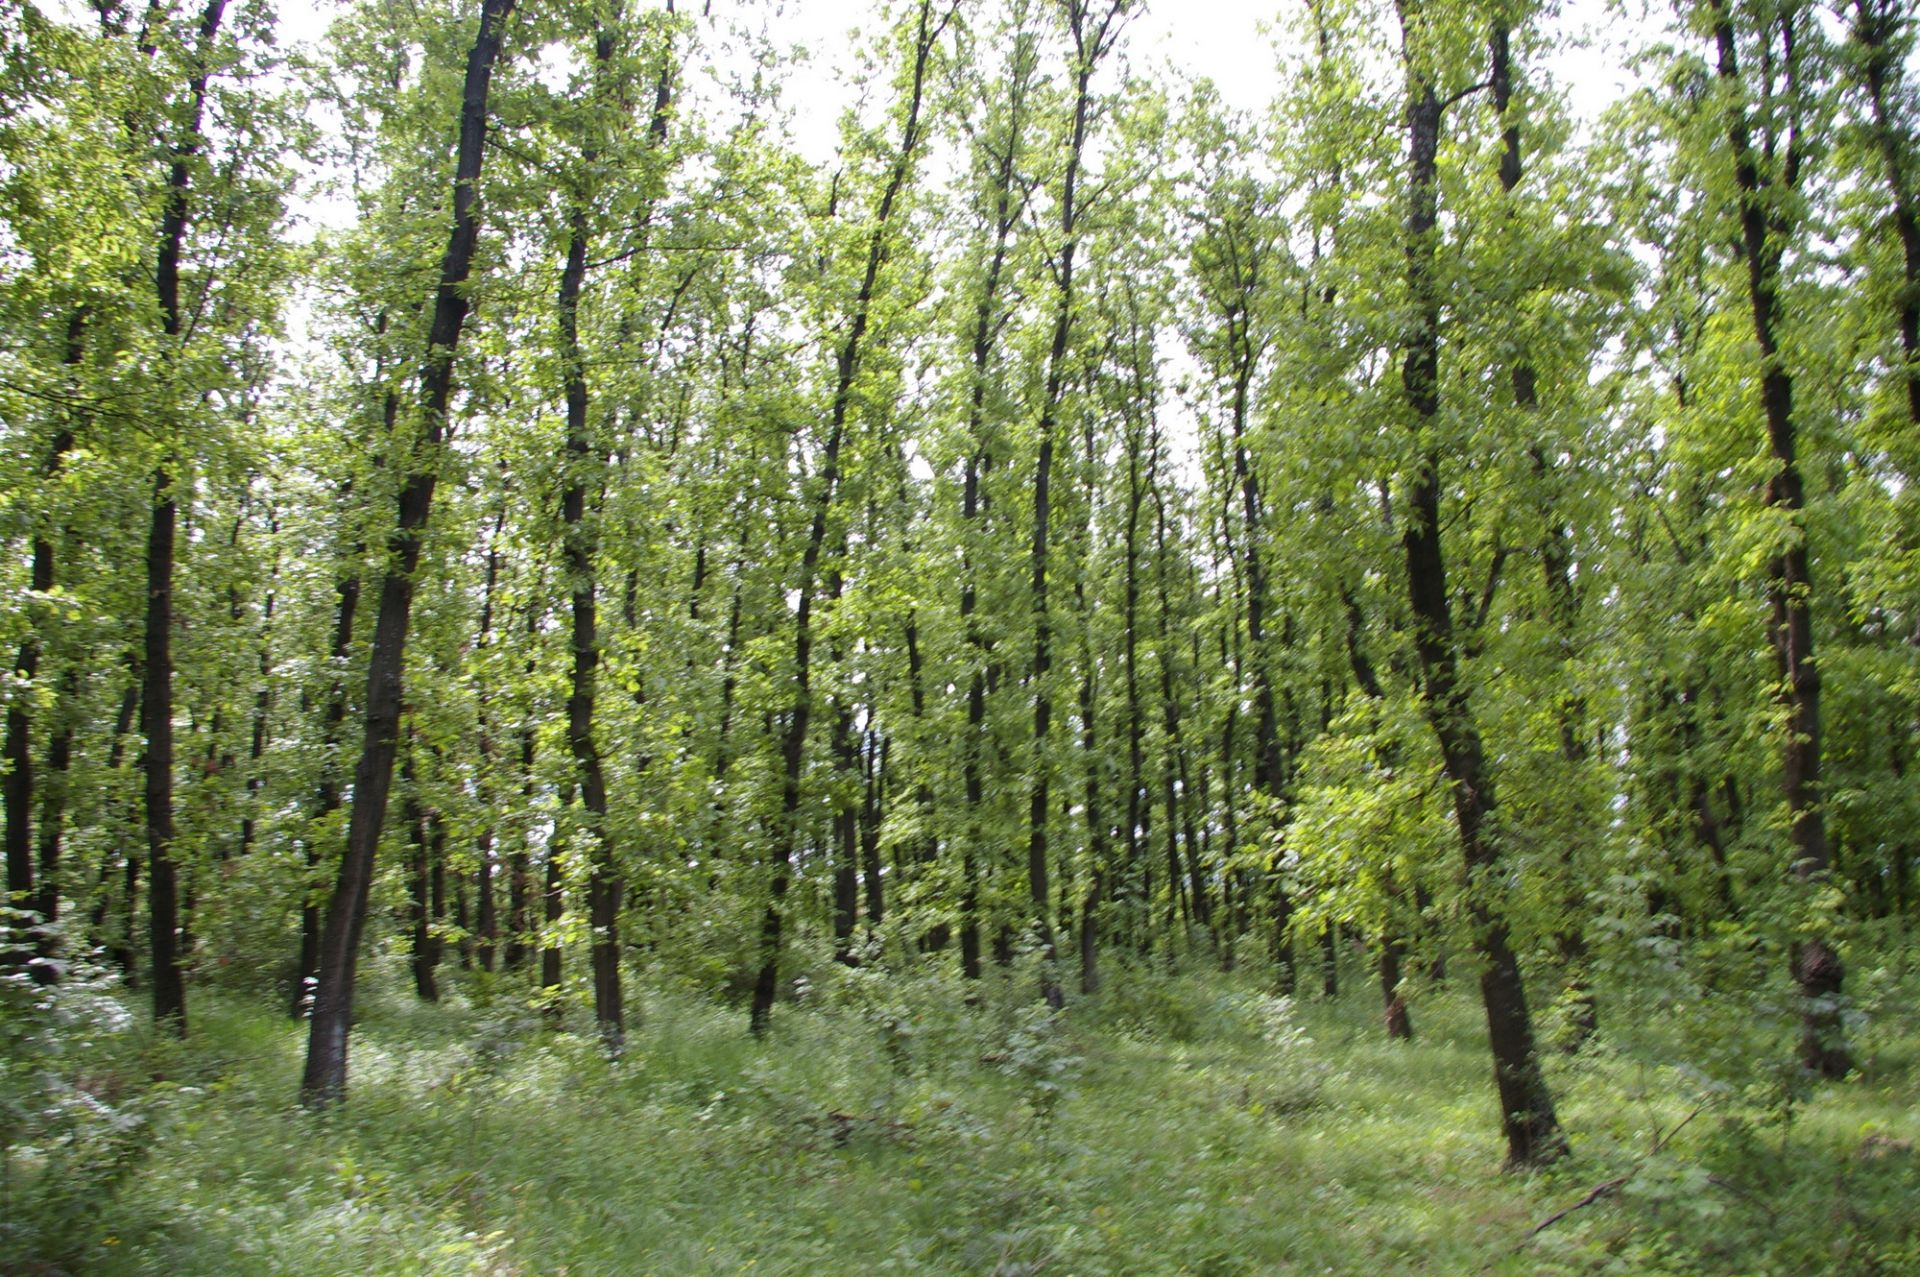 5,200 sqm OAK Forest 40-45 year old located in Vulchek, Bulgaria - Image 6 of 6